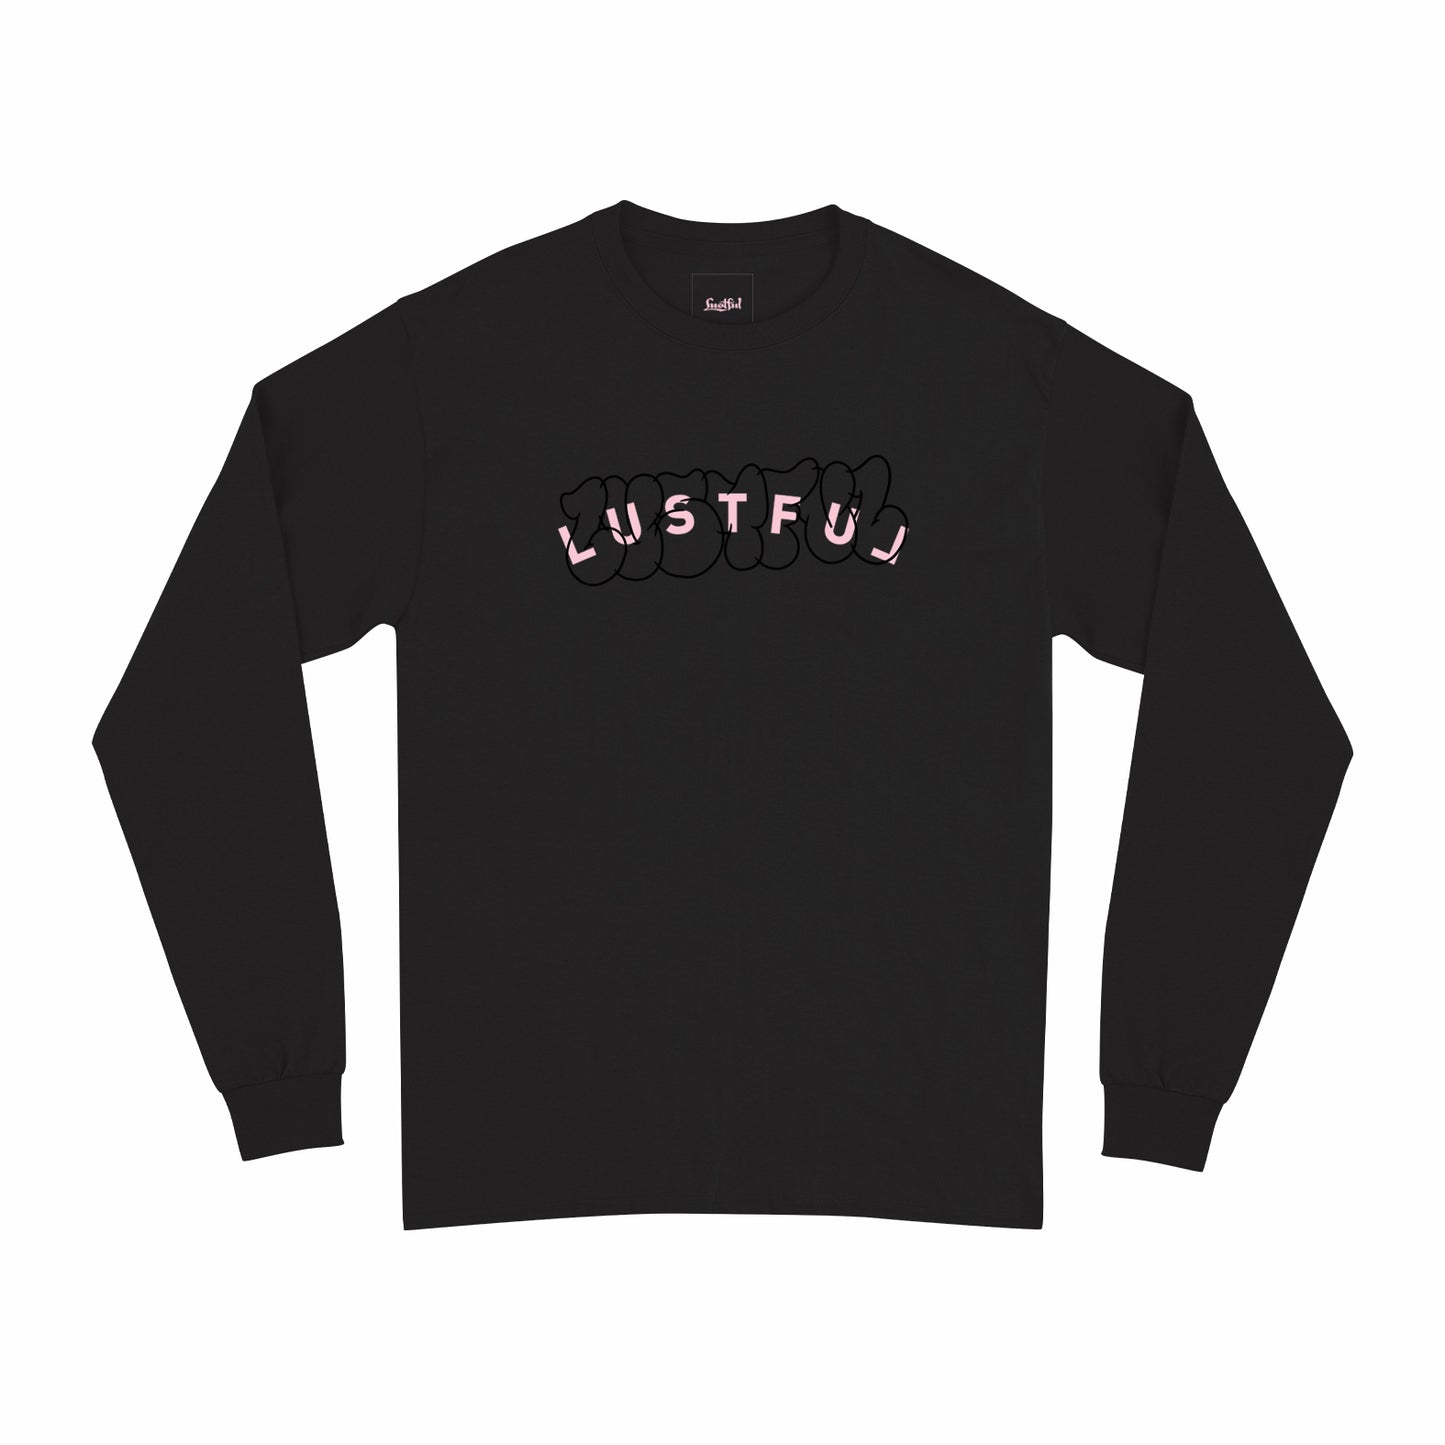 Throwup LS t-shirt in black